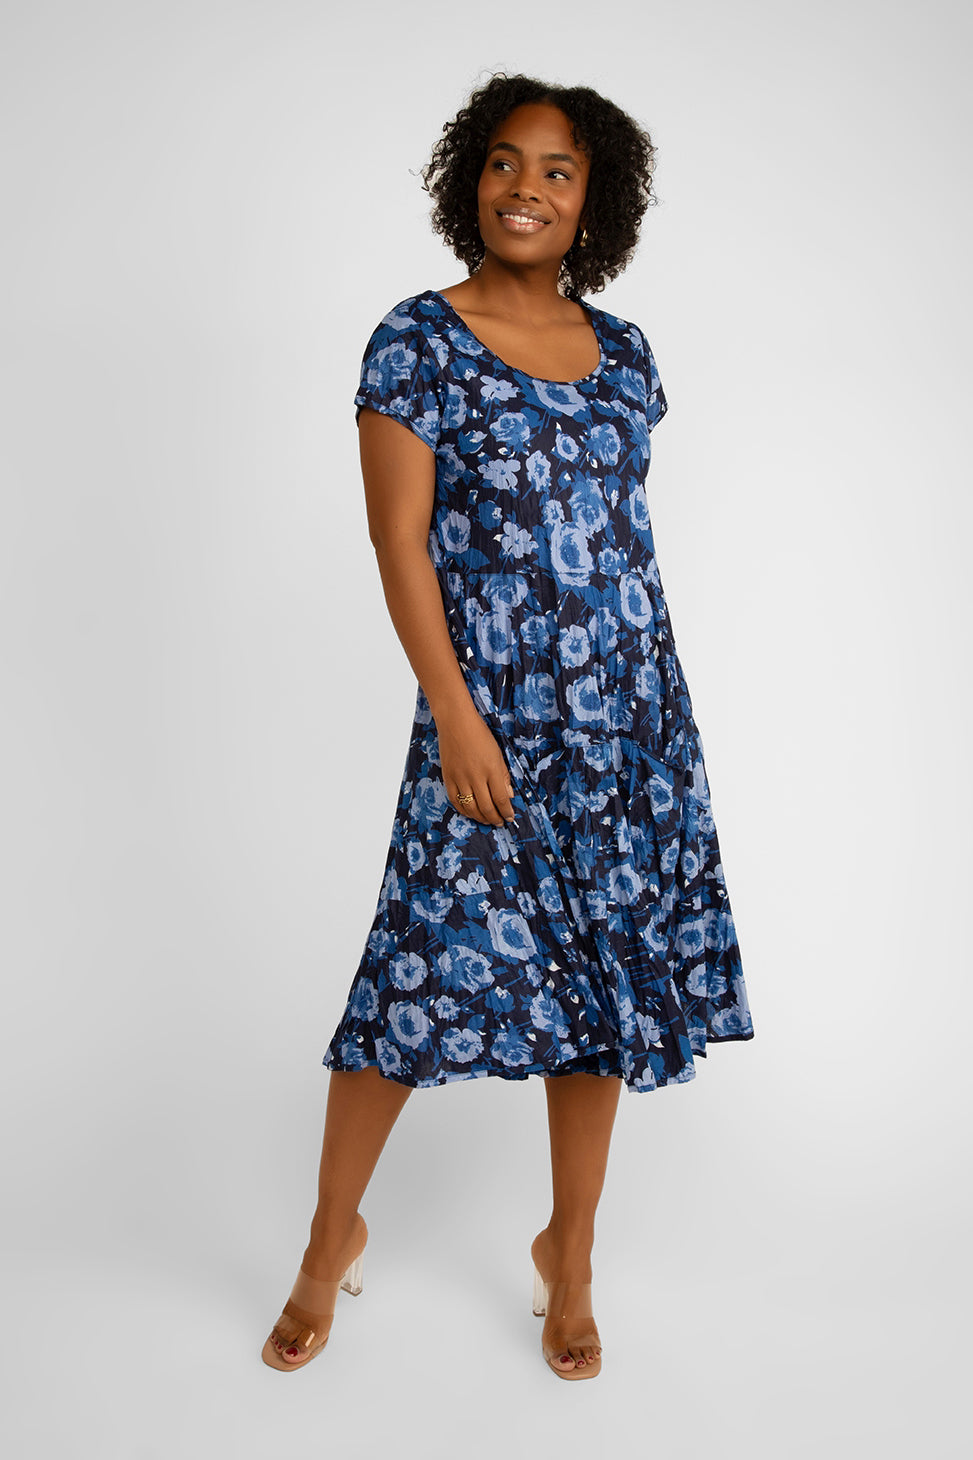 Dress Addict Jade Short Sleeve Round Neck Printed Midi Dress with Pockets  in Navy monochromatic floral print